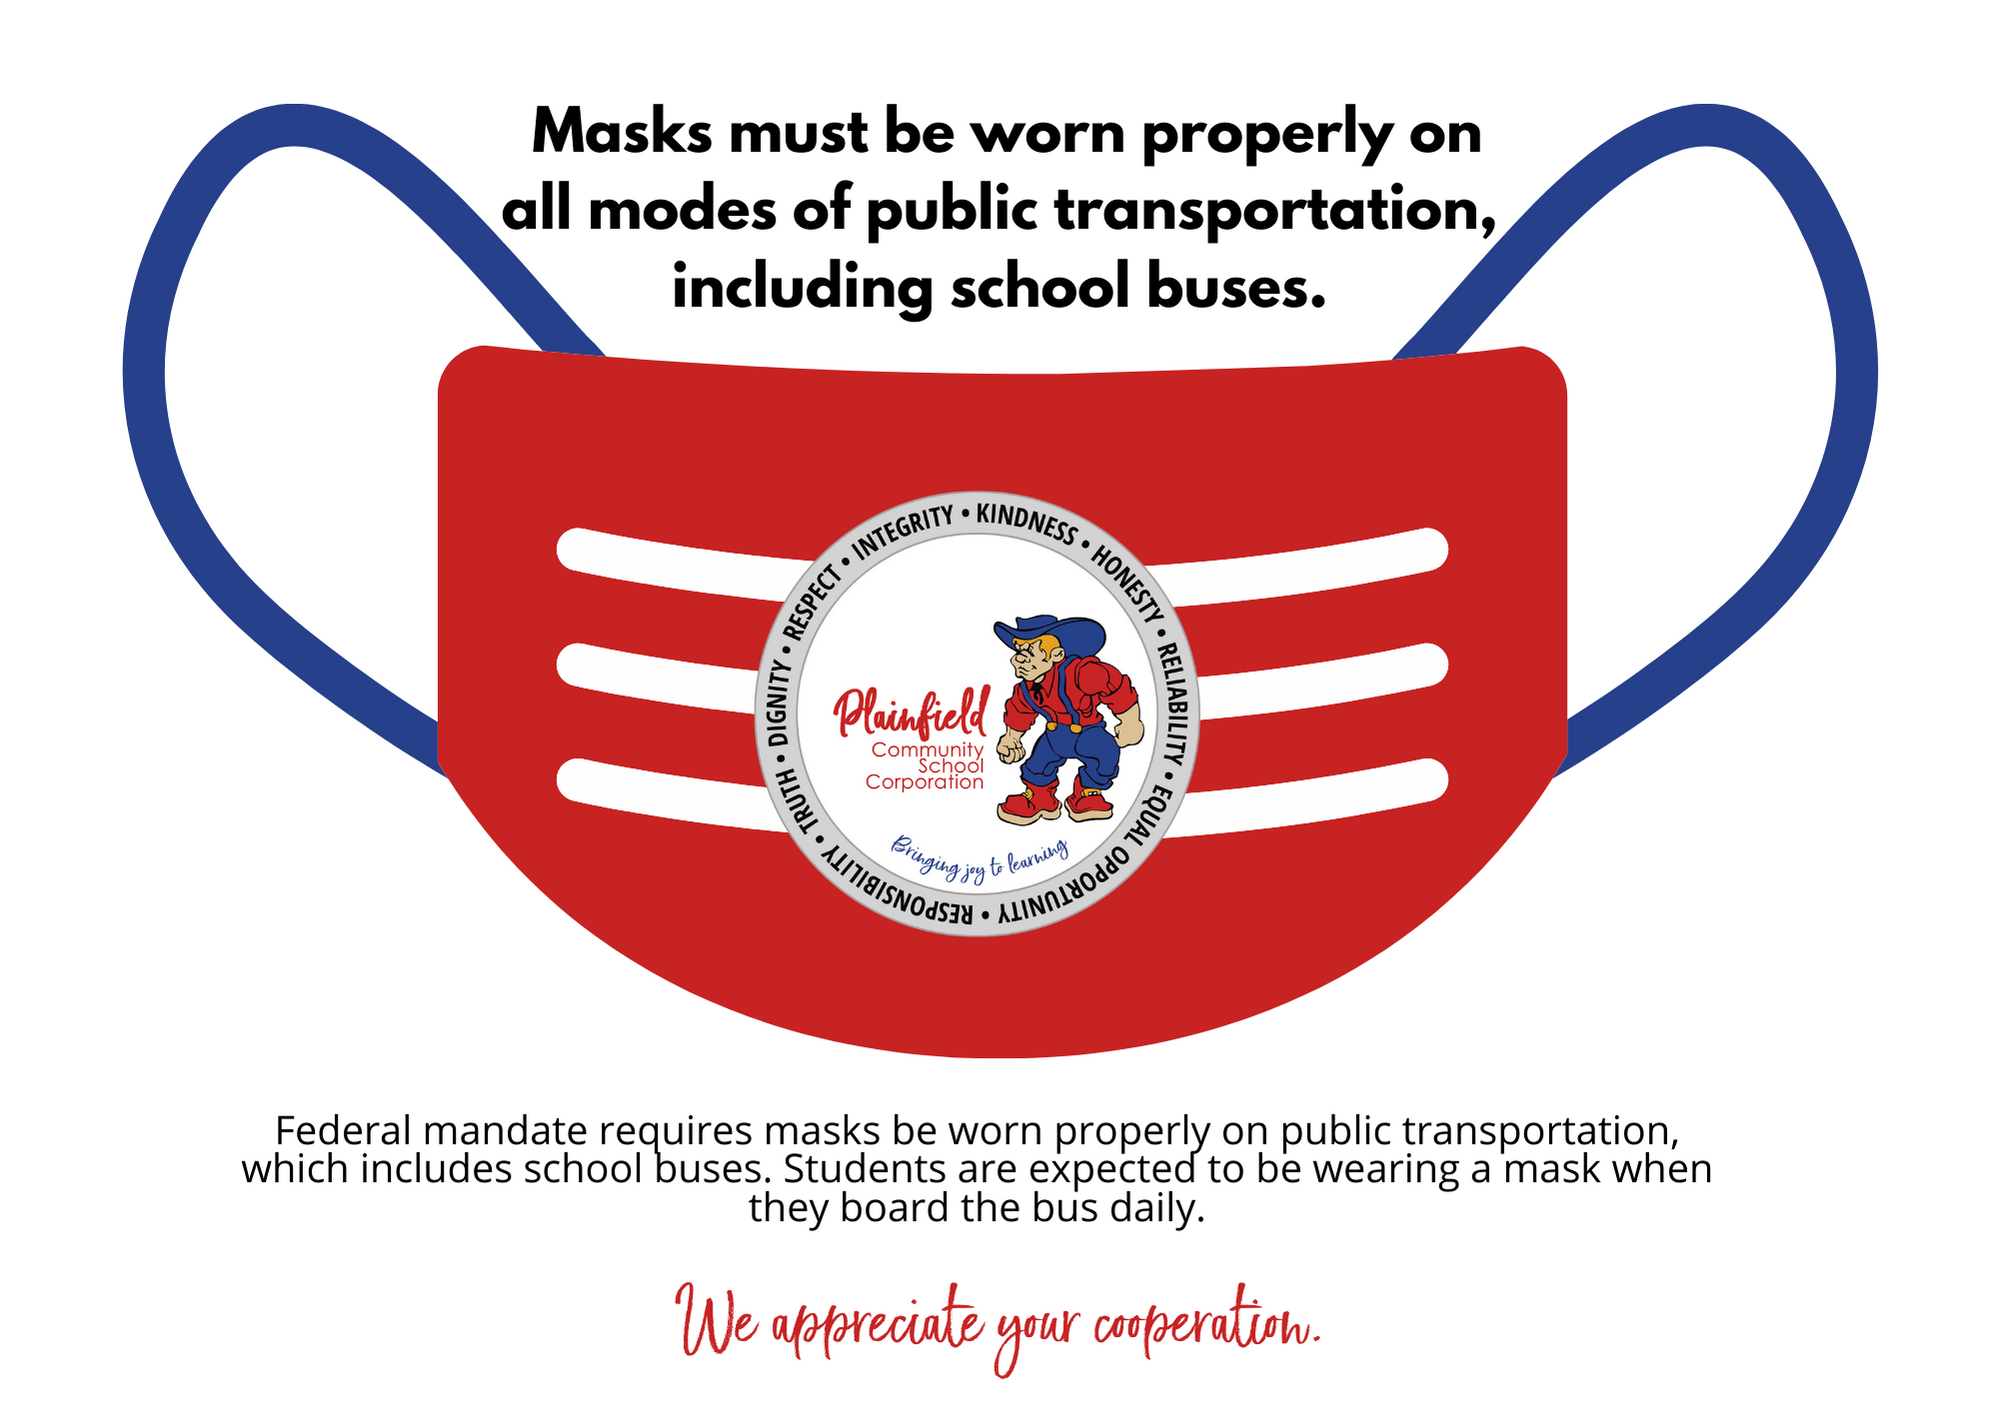 Masks must be properly worn on PCSC school buses